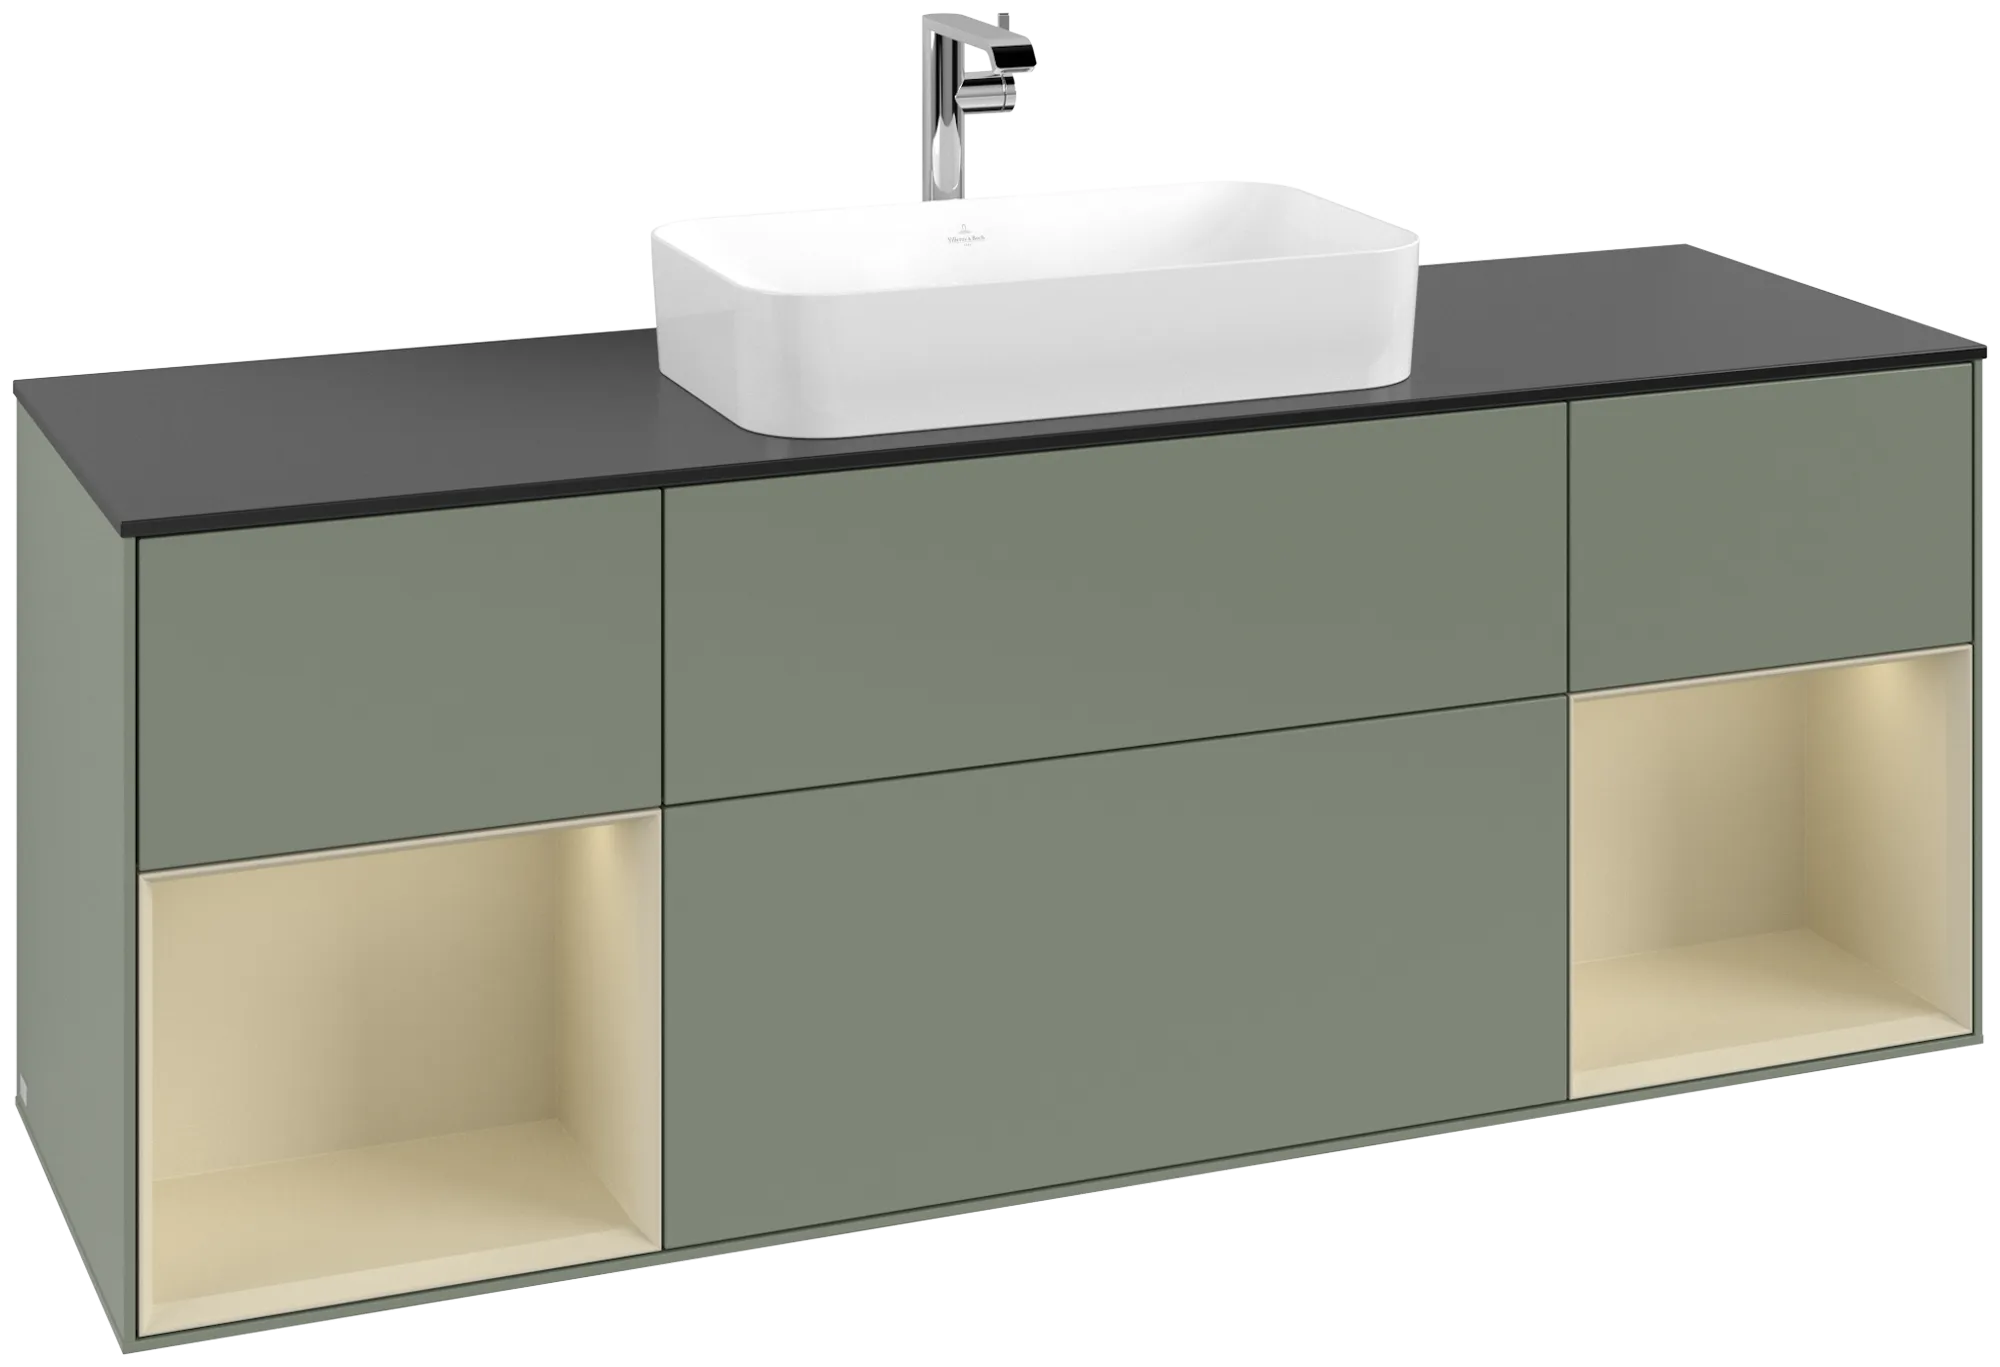 Picture of VILLEROY BOCH Finion Vanity unit, with lighting, 4 pull-out compartments, 1600 x 603 x 501 mm, Olive Matt Lacquer / Silk Grey Matt Lacquer / Glass Black Matt #G332HJGM